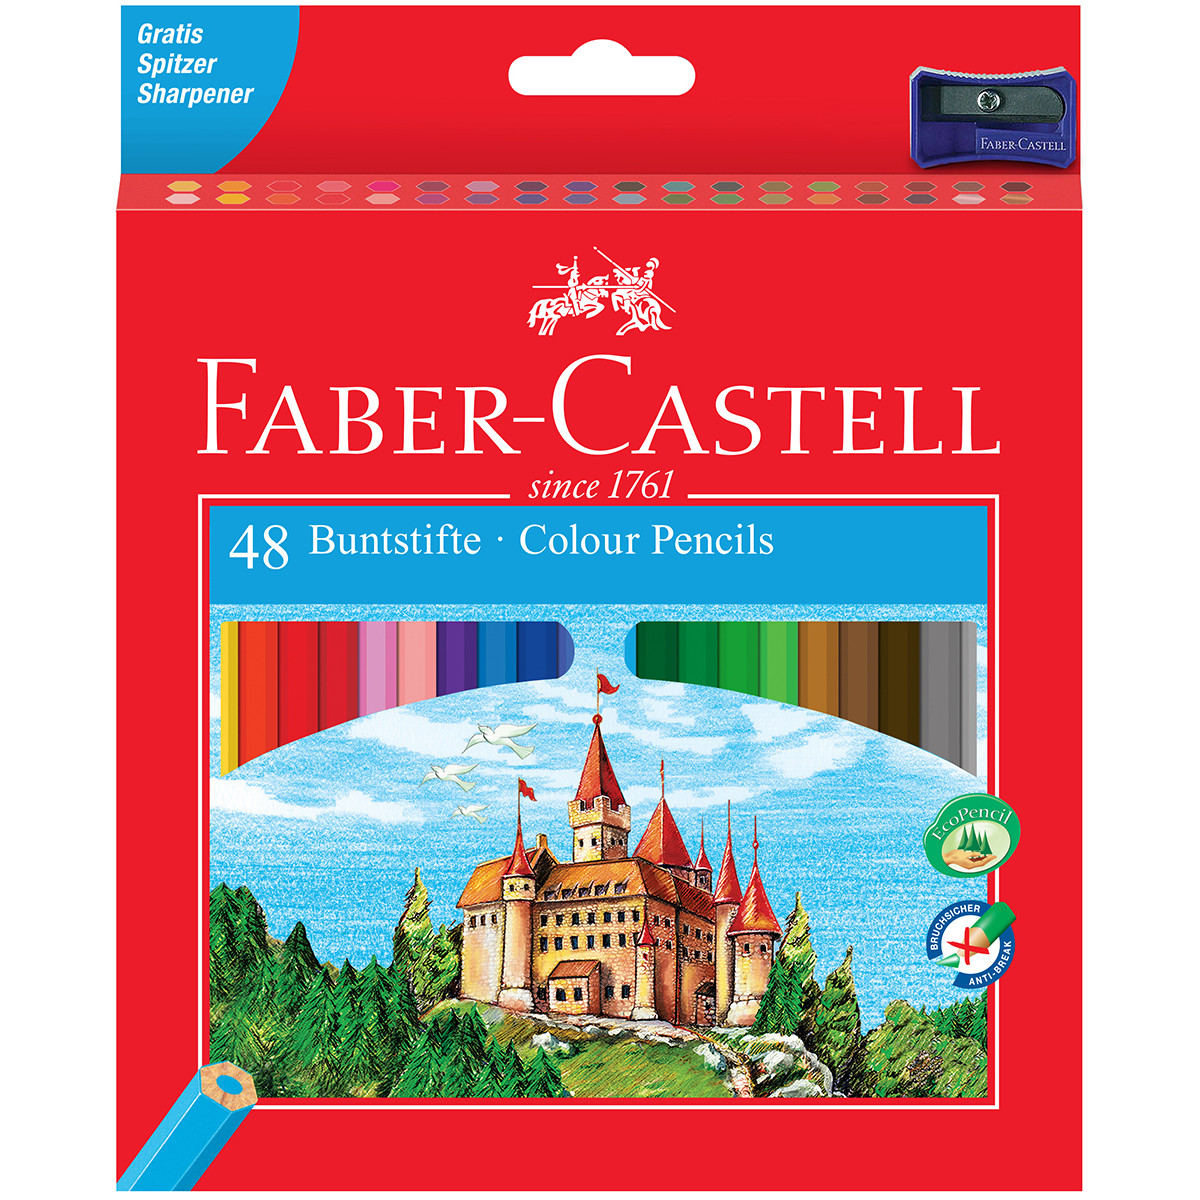 https://www.theonlinepencompany.com/cache/1210/faber-castell/classic-colour-pencils/120148.jpg